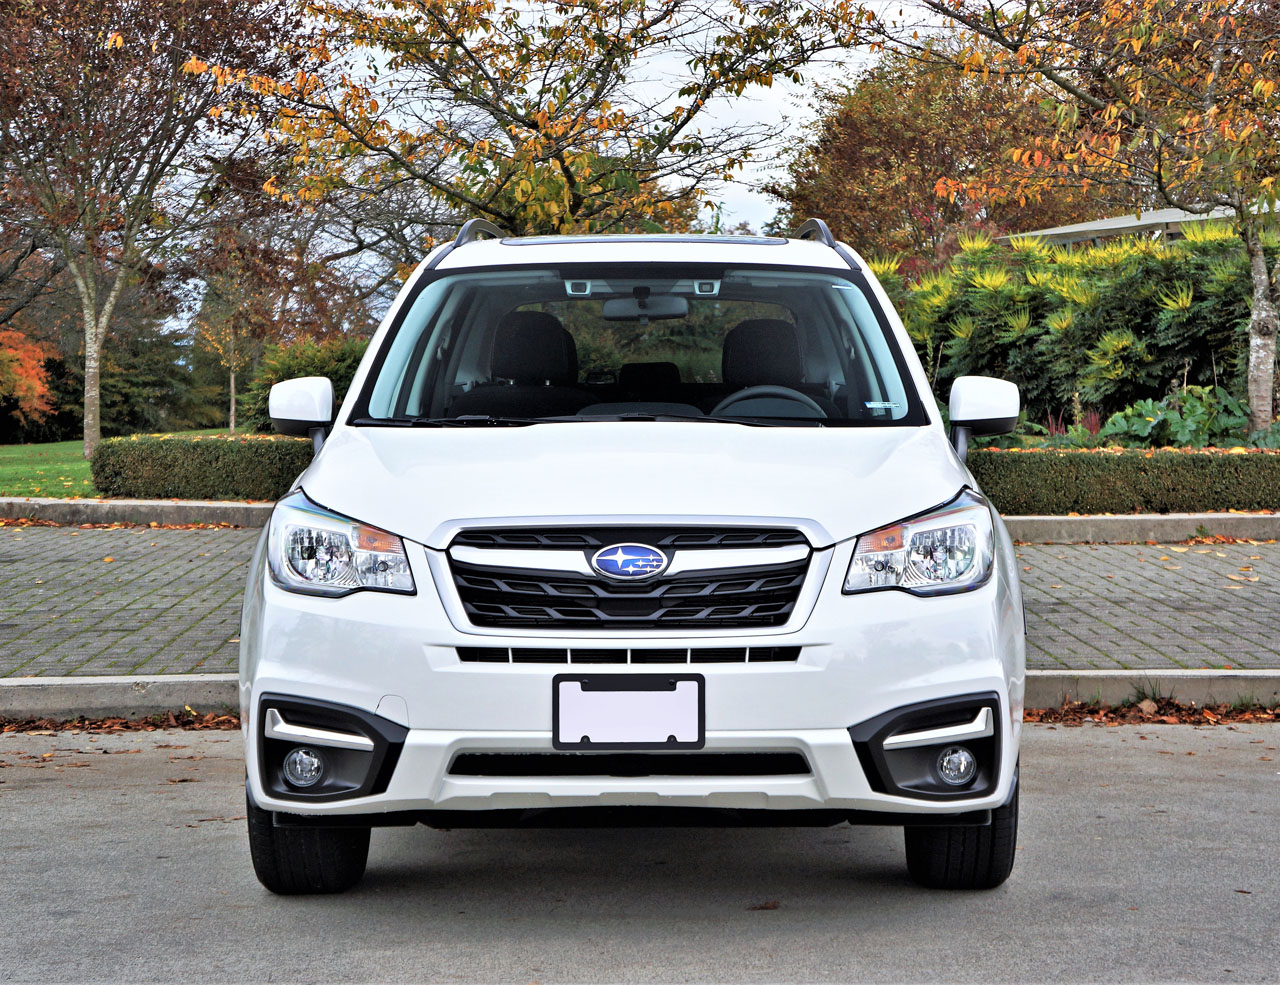 2017 Subaru Forester 2.5i Touring Road Test Review The